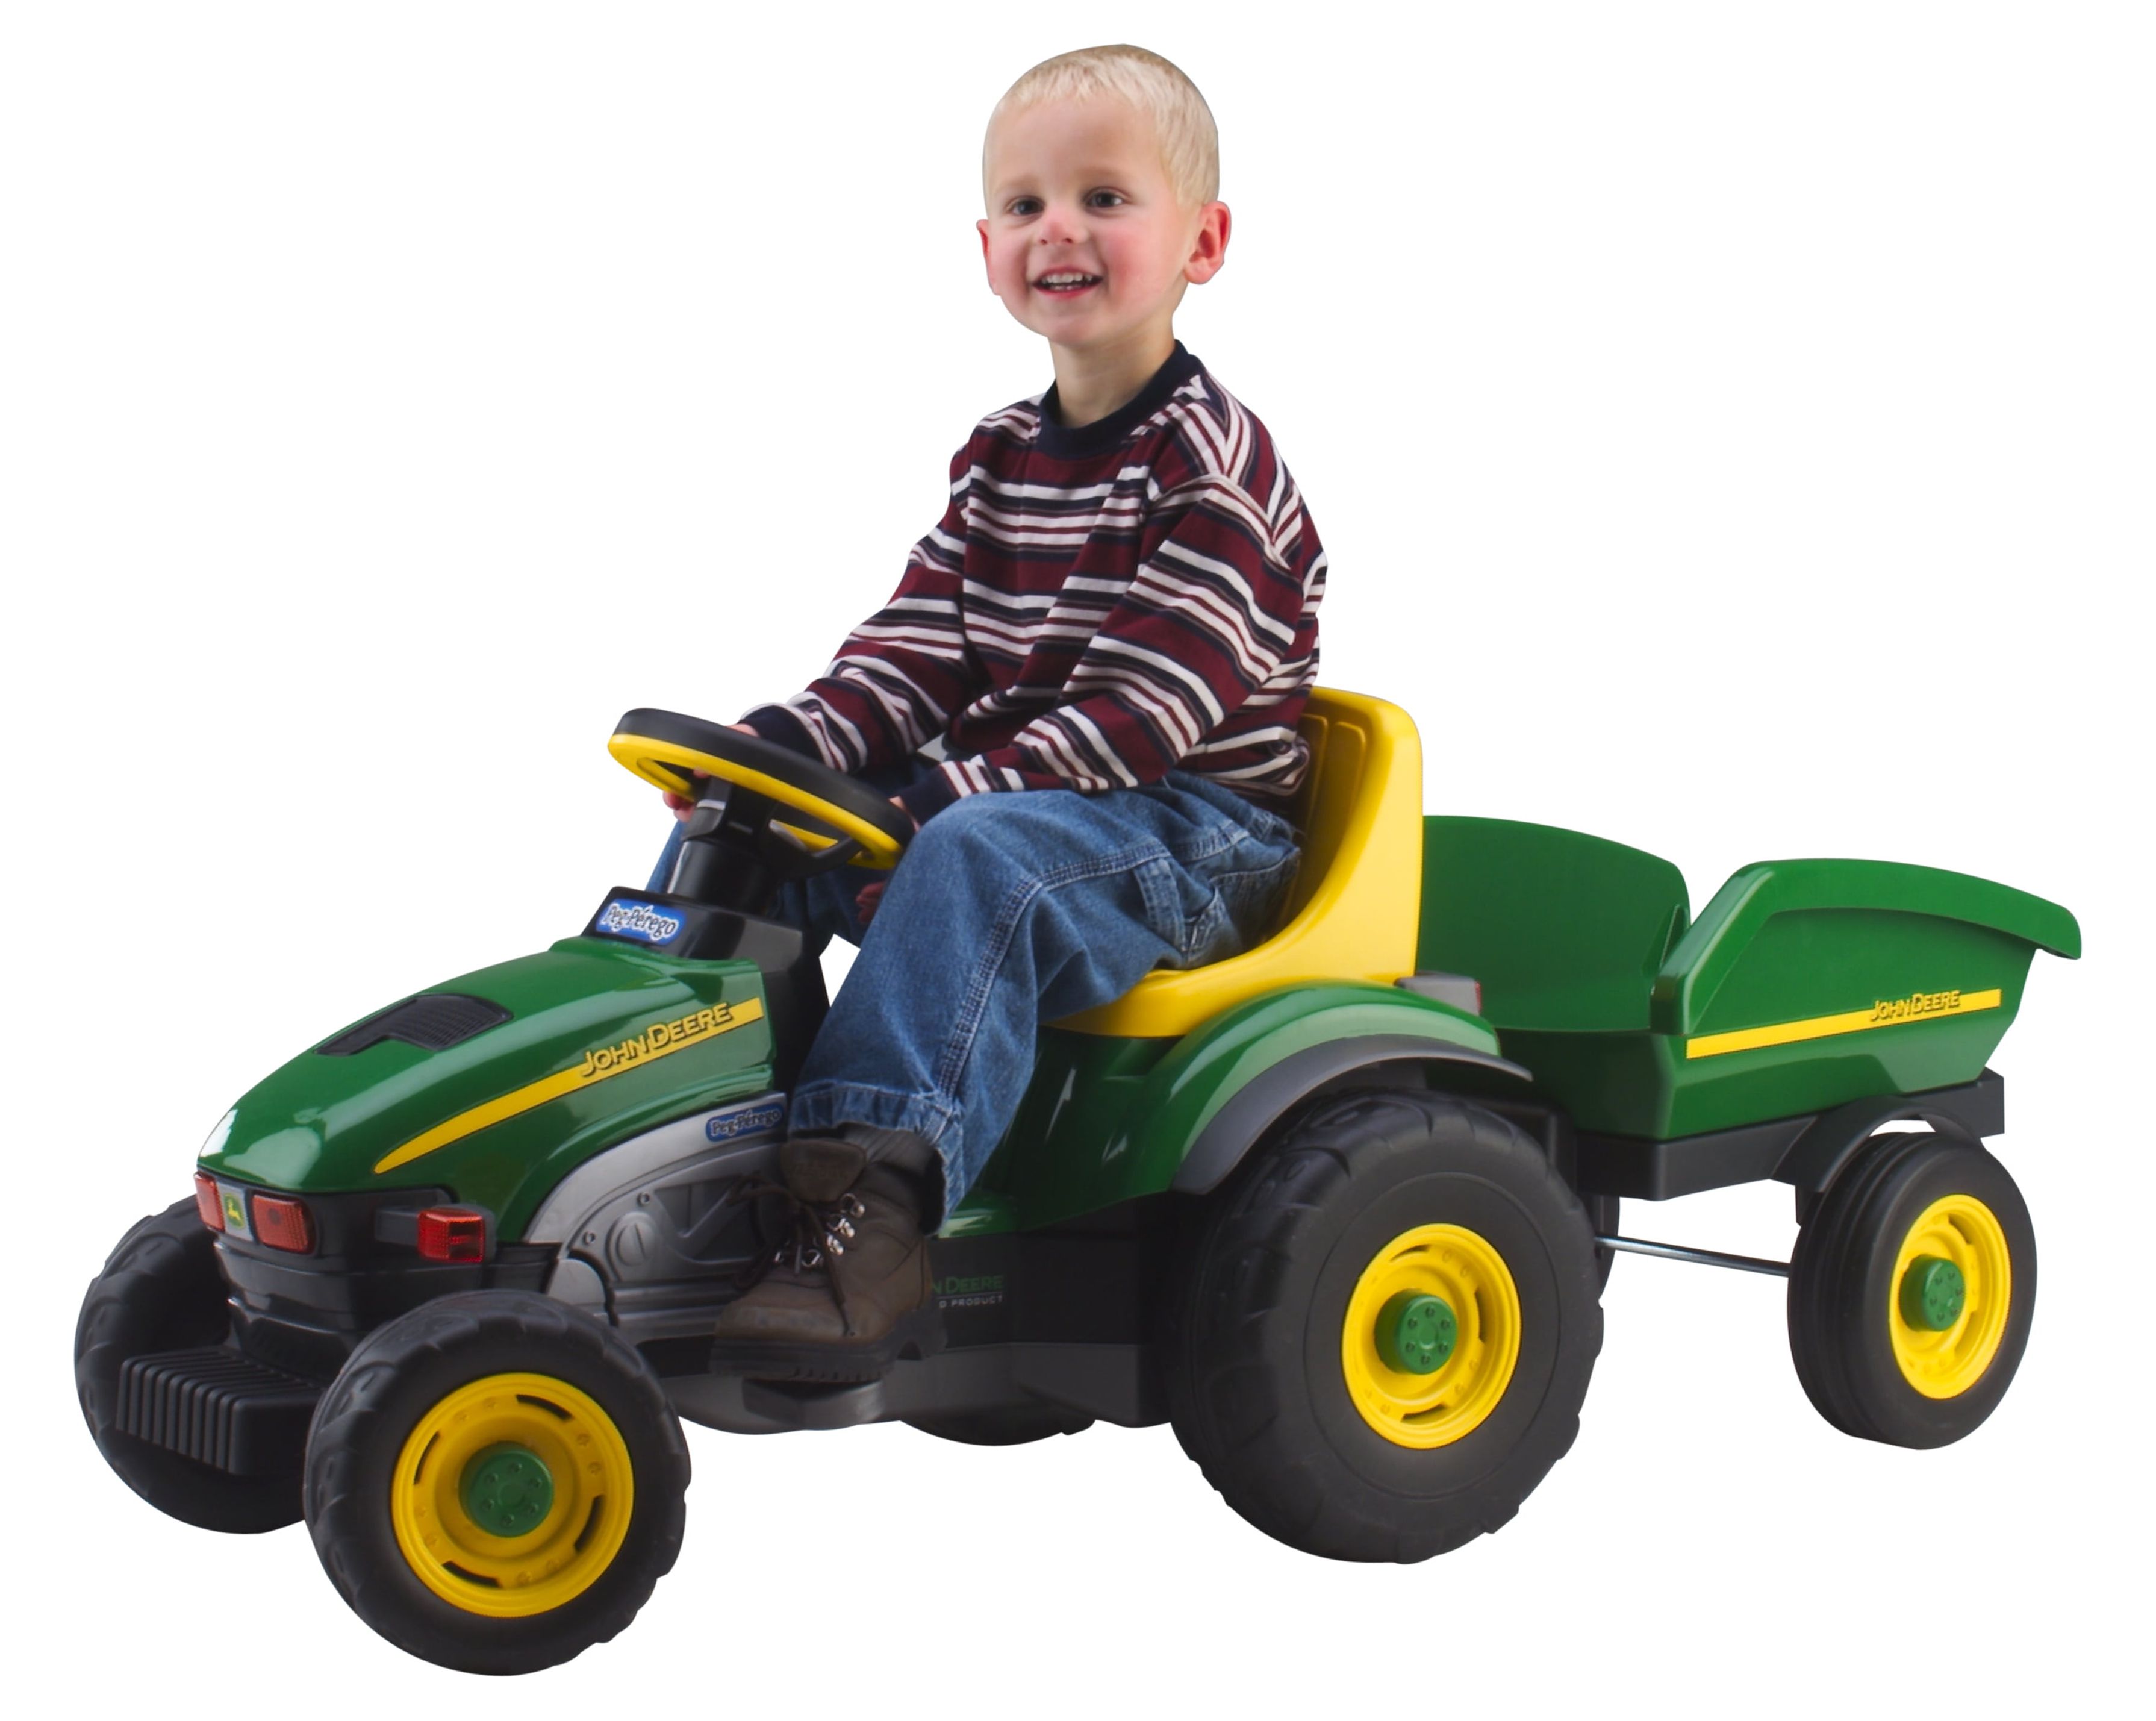 Peg Perego John Deere Farm Tractor and Trailer Pedal Ride-On - image 1 of 8